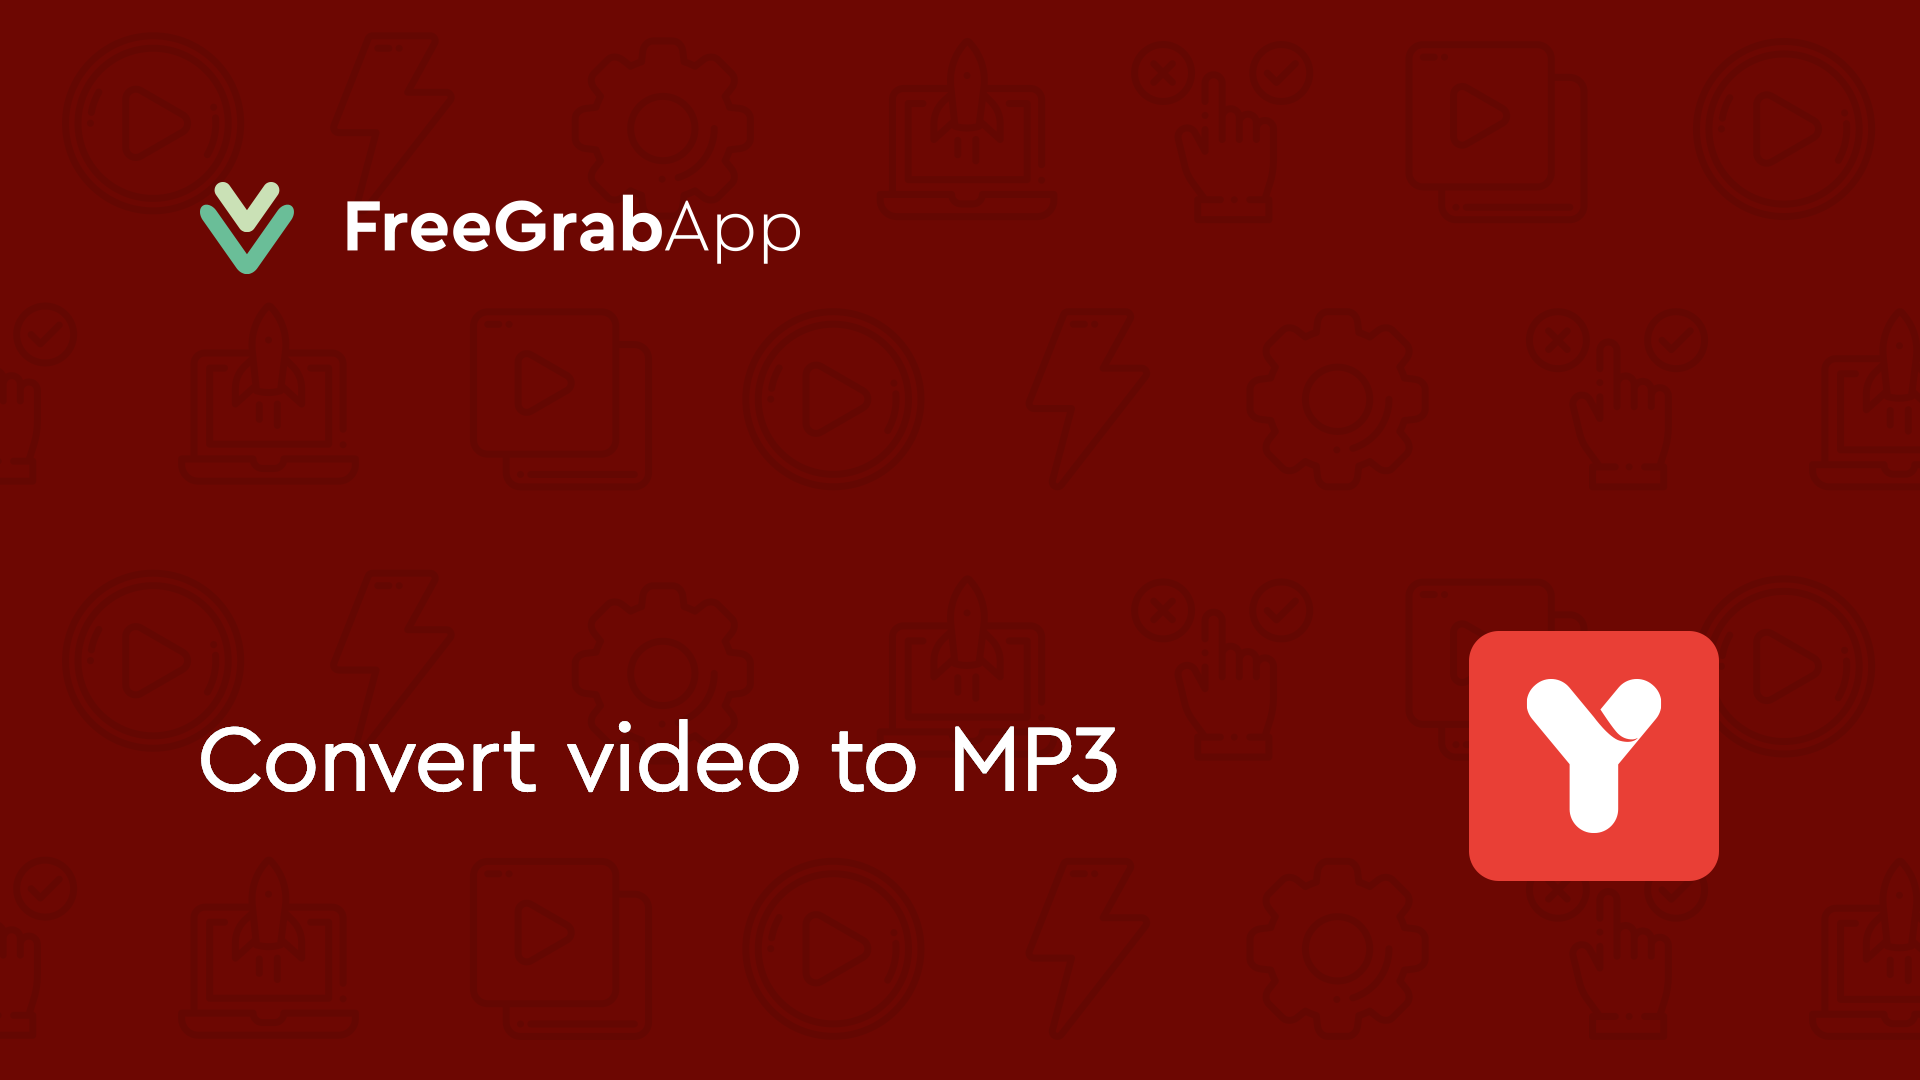 Free YouTube Download – Convert video to MP3